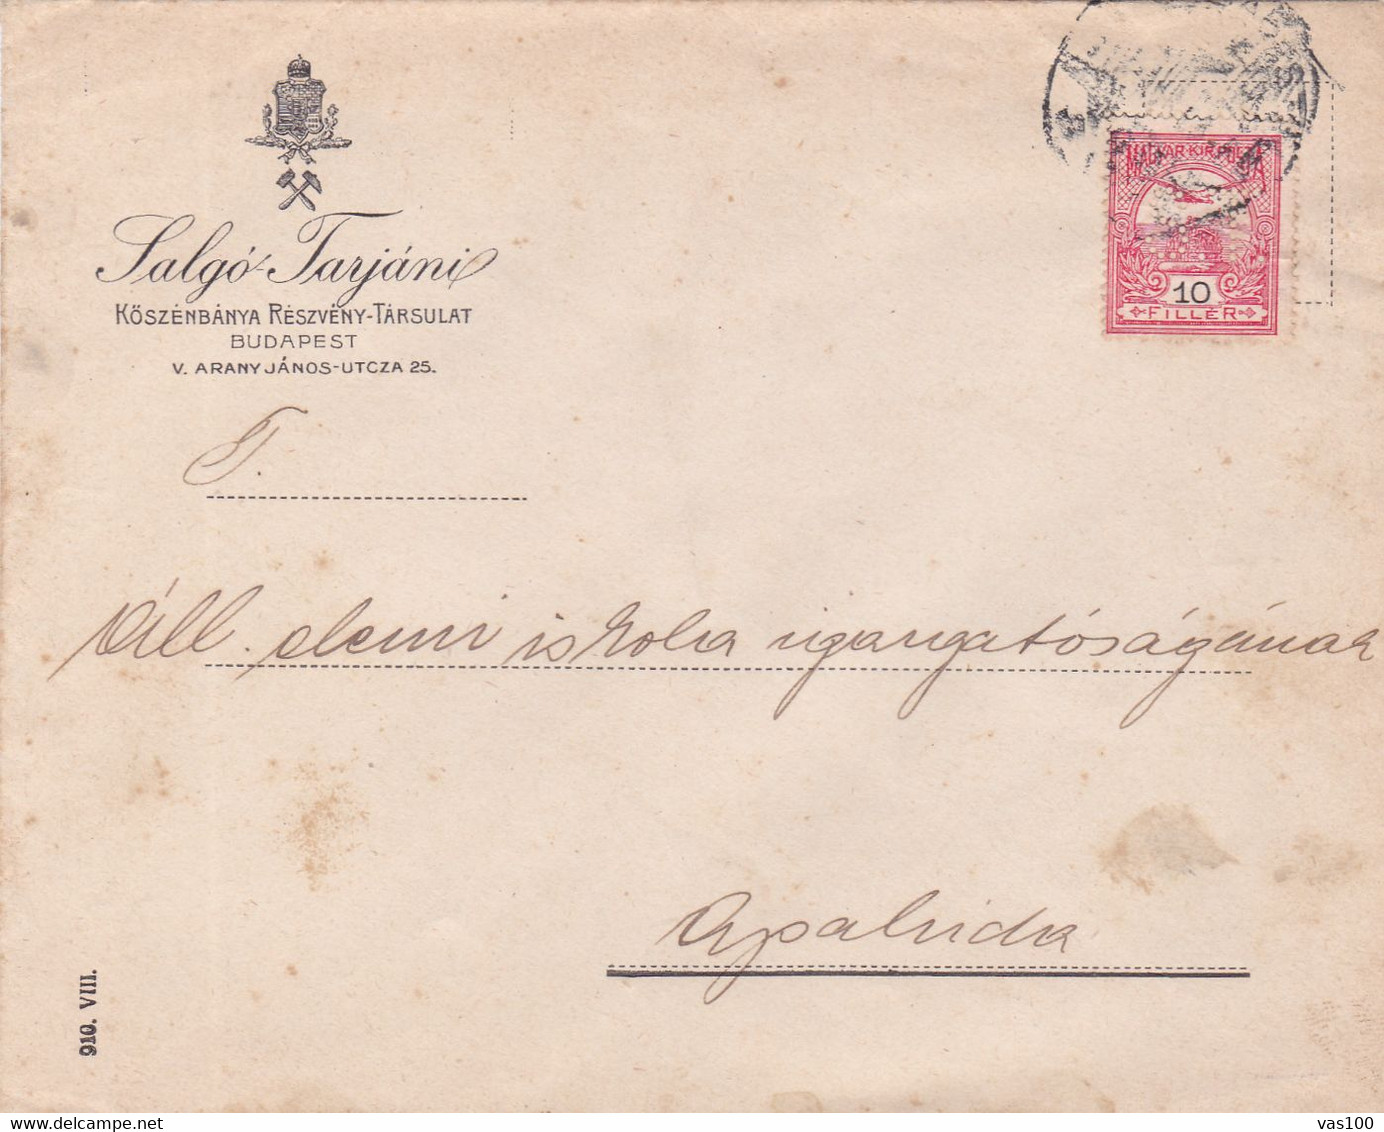 PERFINS PERFORE,HUNGARIA, COMMERCIAL PATENT SALGO TARJANI  "S T ", 1903 COVER TO APAHIDA ROMANIA. - Perforiert/Gezähnt